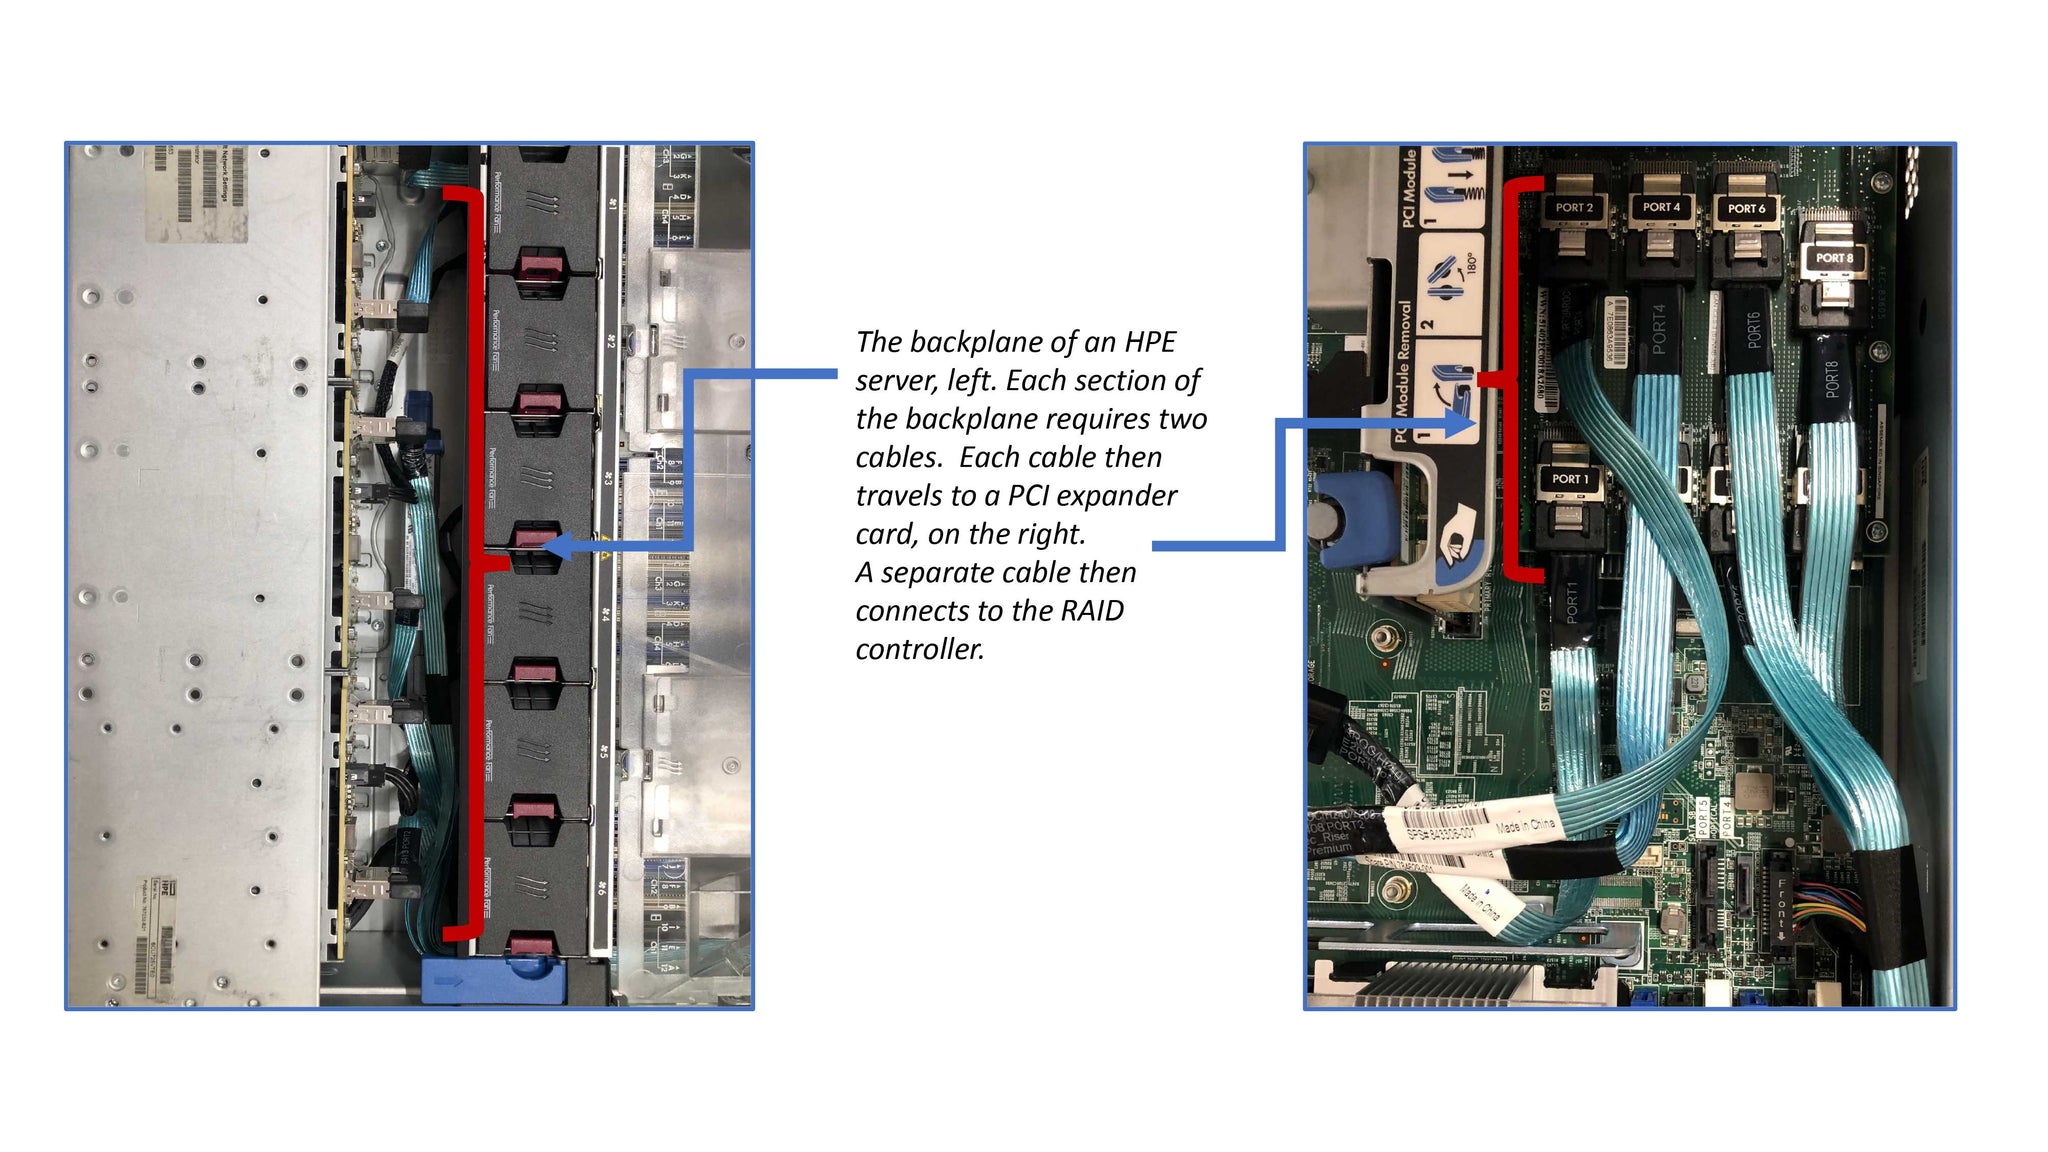 The backplane of an HPE server, left. Each section of the backplane requires two cables.  Each cable then travels to a PCI expander card, on the right.  A separate cable then connects to the RAID controller.  